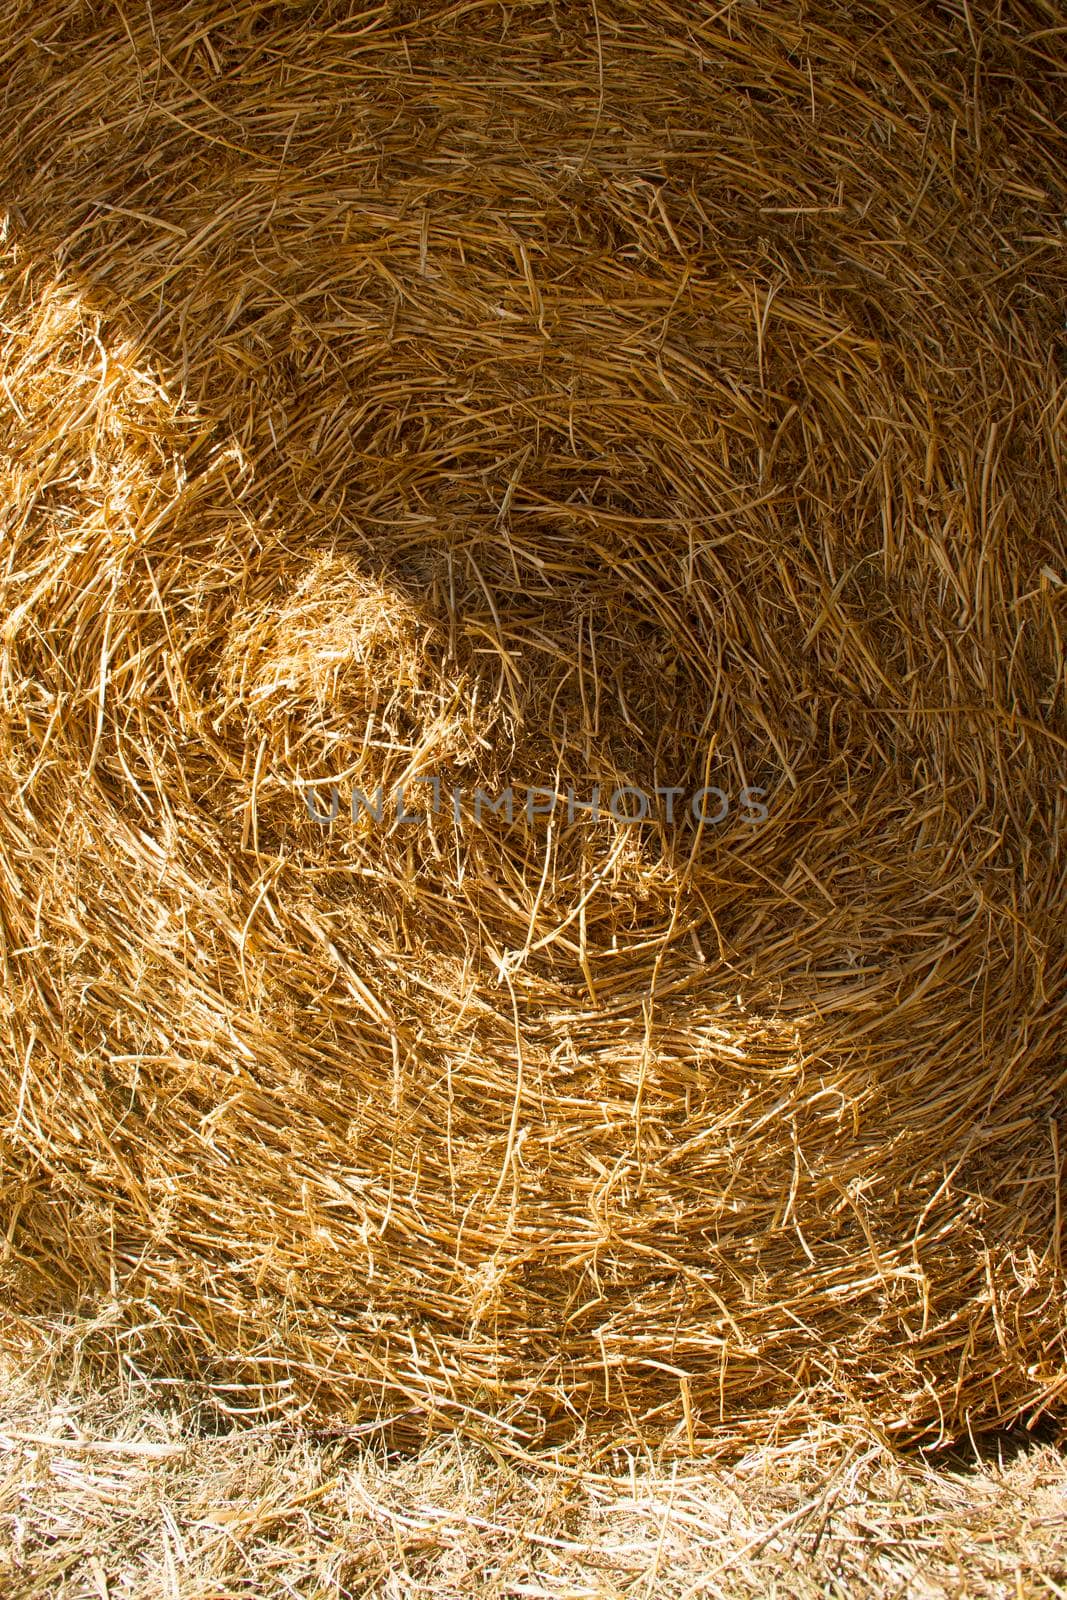 Straw used for the litter for horses in a riding school